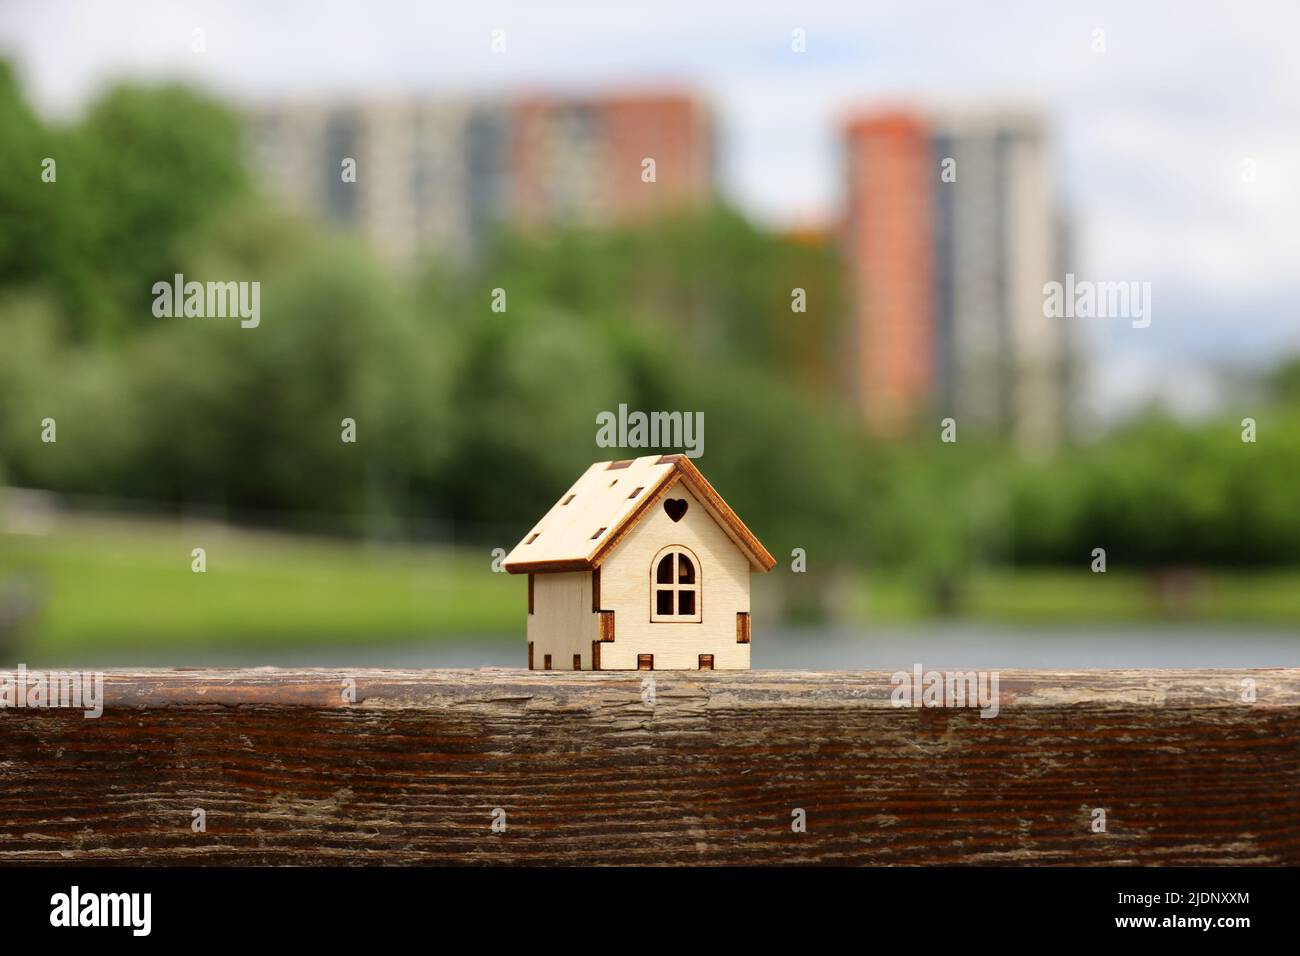 Wooden house model on background of summer lake and high-rise residential buildings. Concept of country cottage, real estate in ecologically area Stock Photo